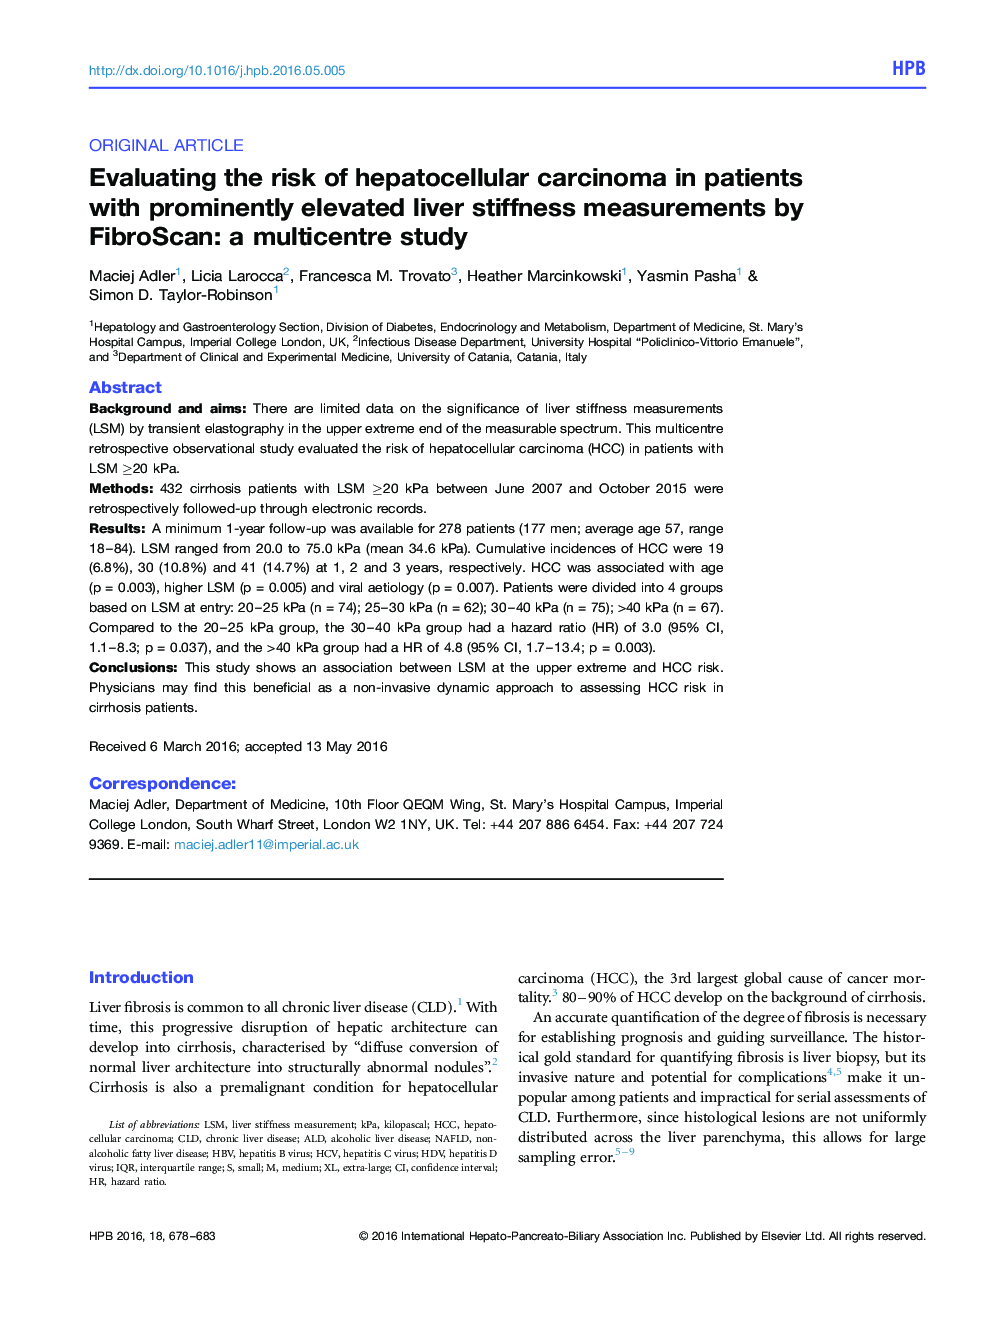 Evaluating the risk of hepatocellular carcinoma in patients with prominently elevated liver stiffness measurements by FibroScan: a multicentre study